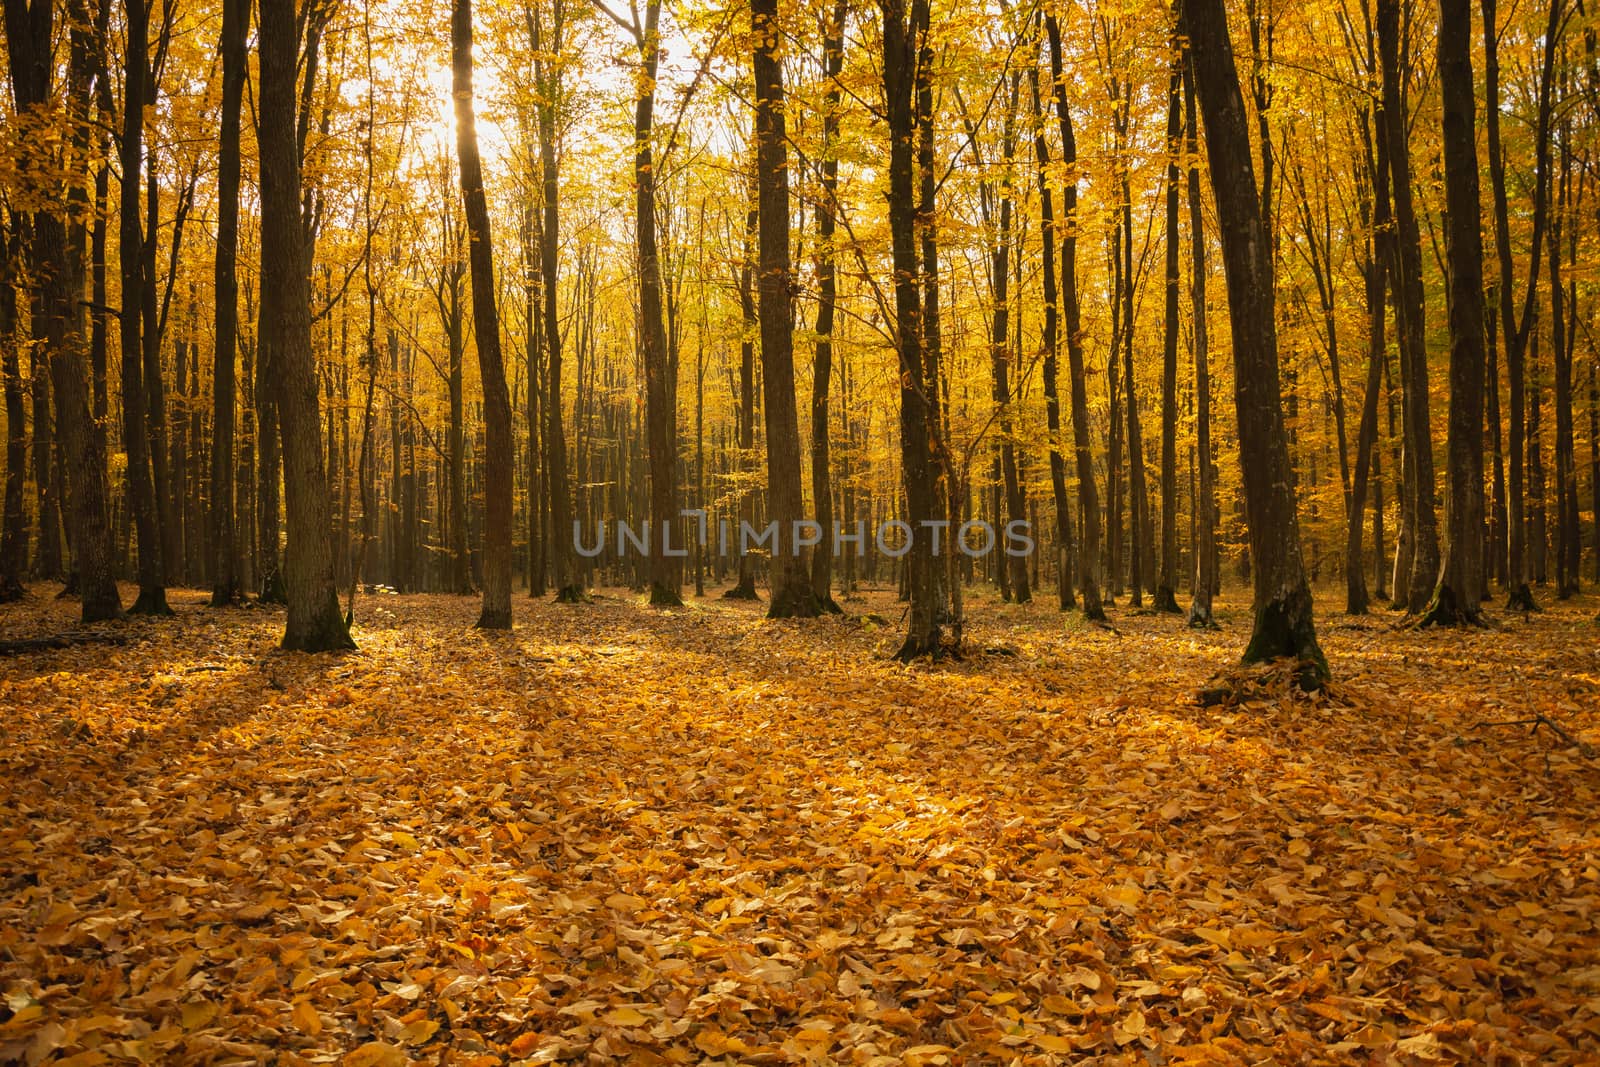 Autumn orange forest with fallen leaves, sunny october day